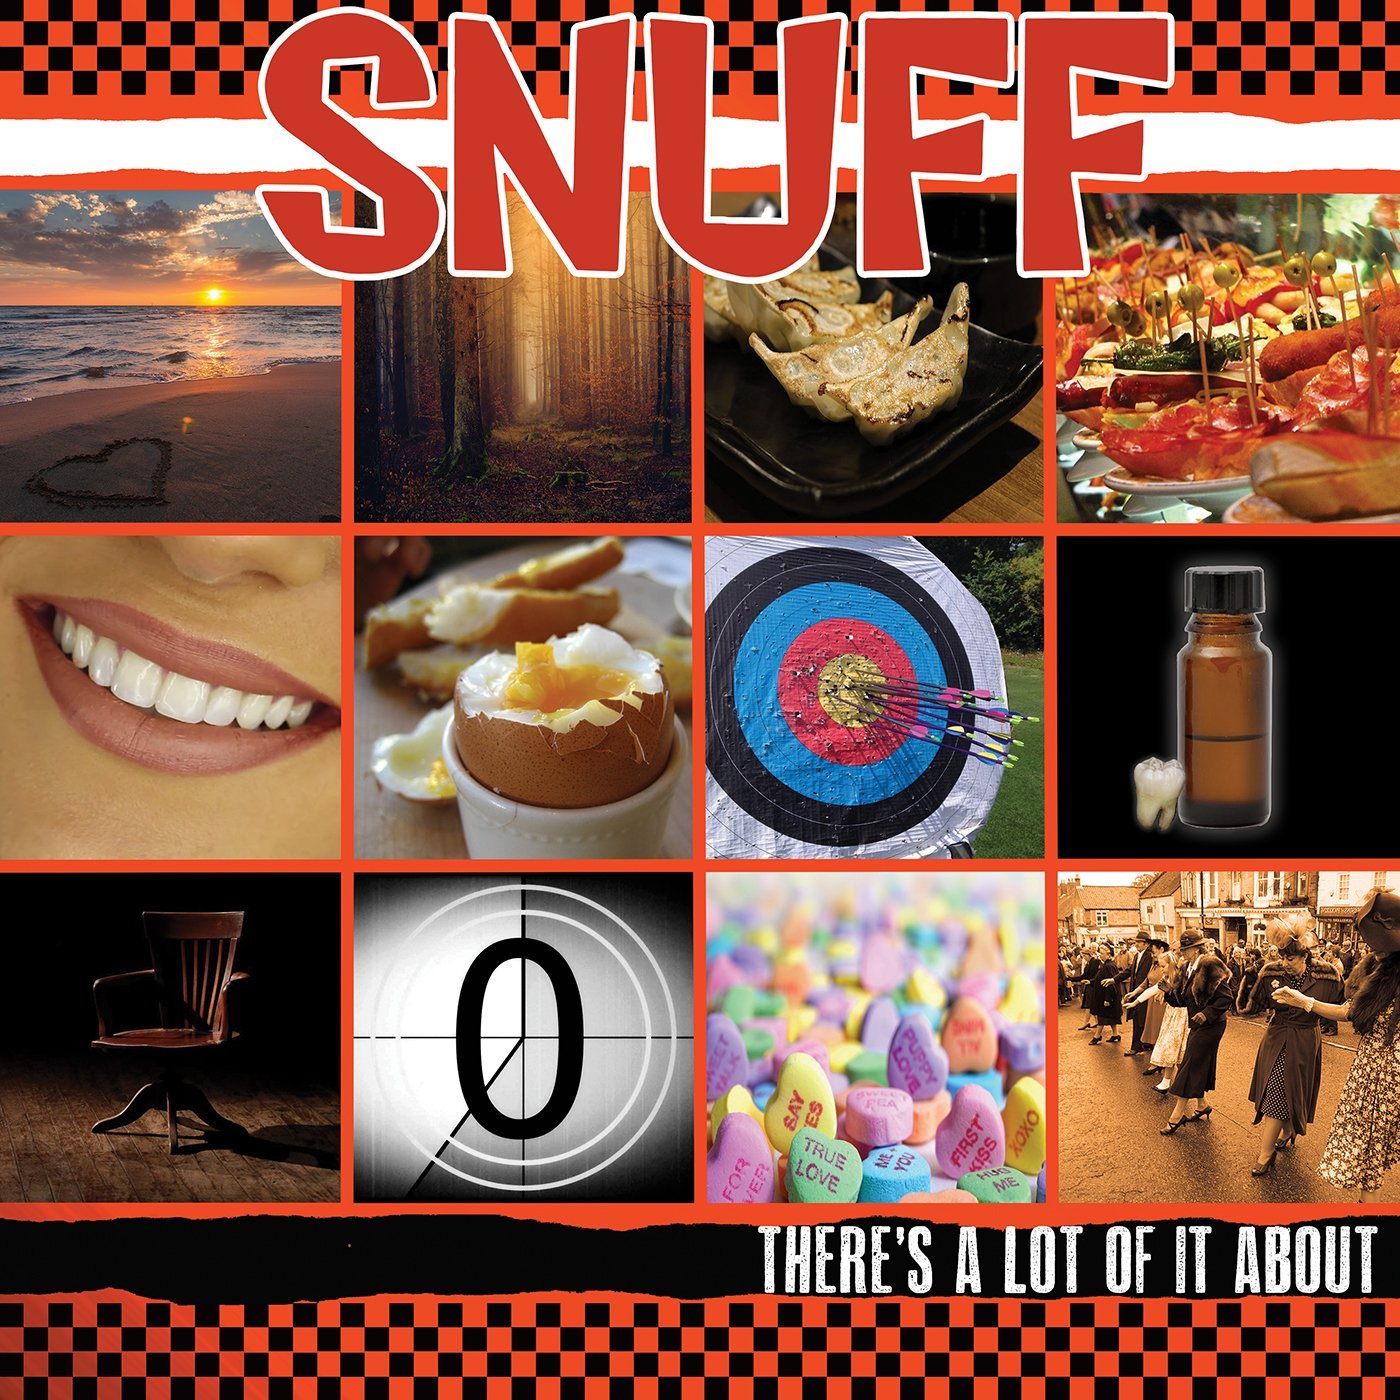 Snuff-Theres A Lot Of It About-16BIT-WEB-FLAC-2019-VEXED